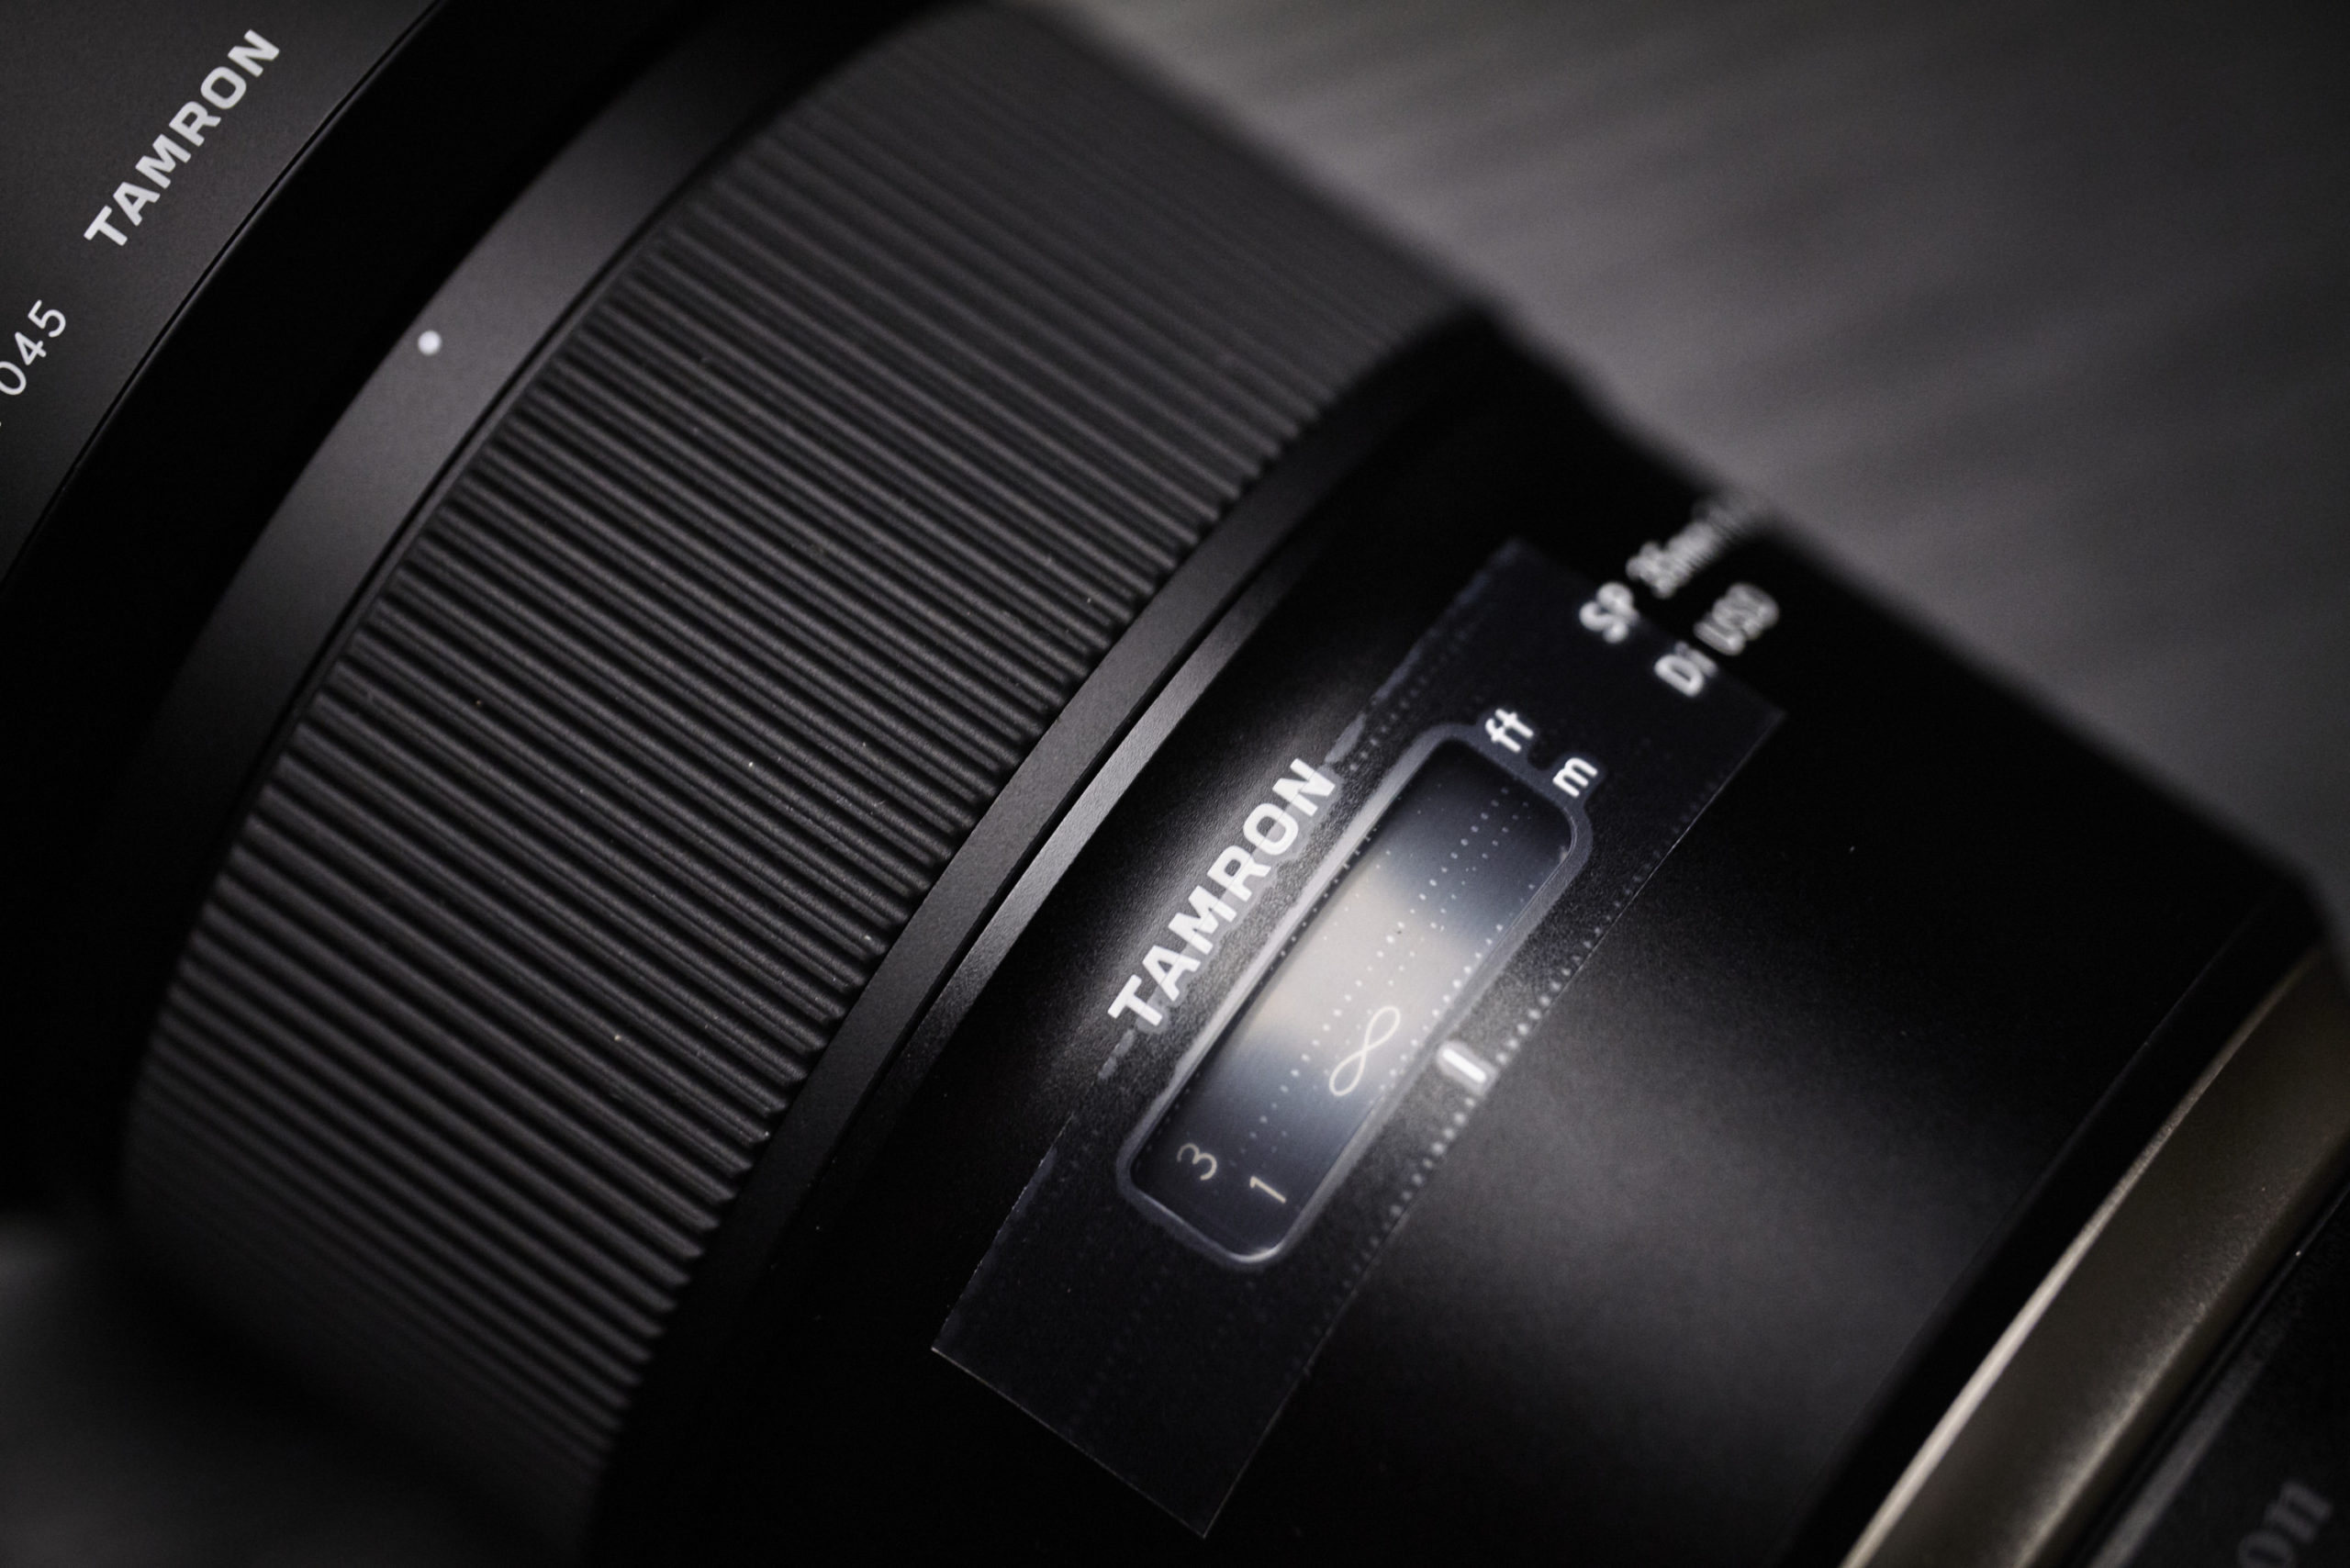 Chris Gampat The Phoblographer Tamron 35mm f1.4 Di USD product images review 3